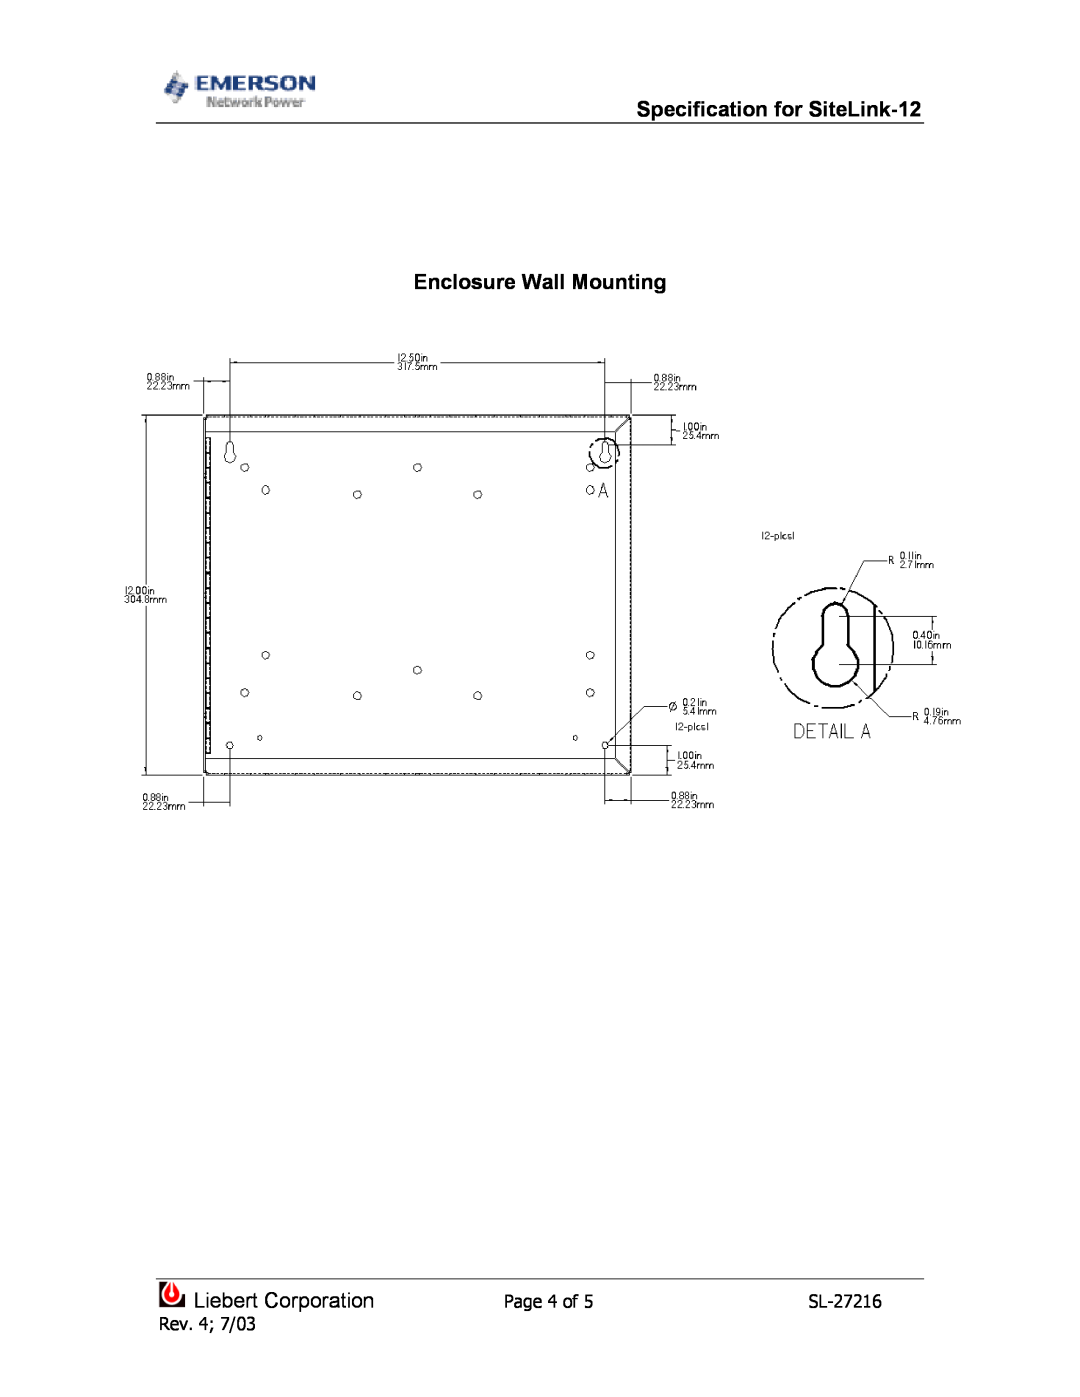 Emerson Specification for SiteLink-12 Enclosure Wall Mounting, Liebert CorporationPage 4 of 5SL-27216, Rev. 4 7/03 